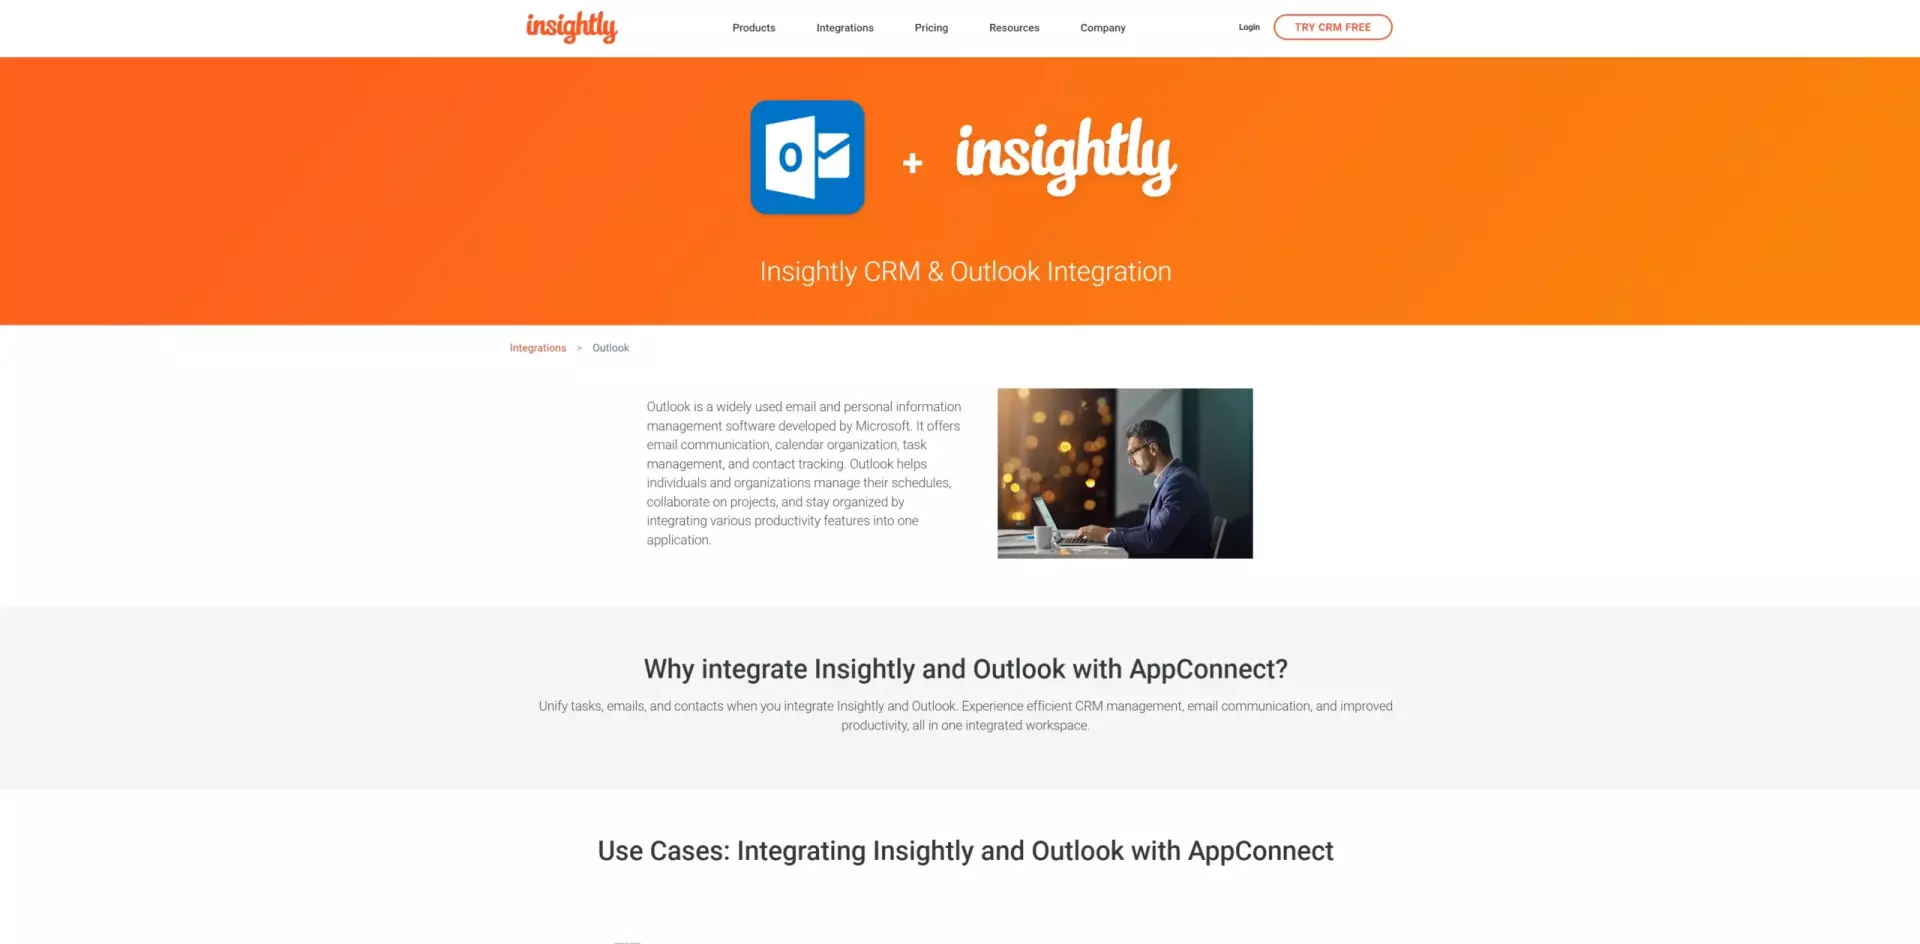 Insightly Outlook integration